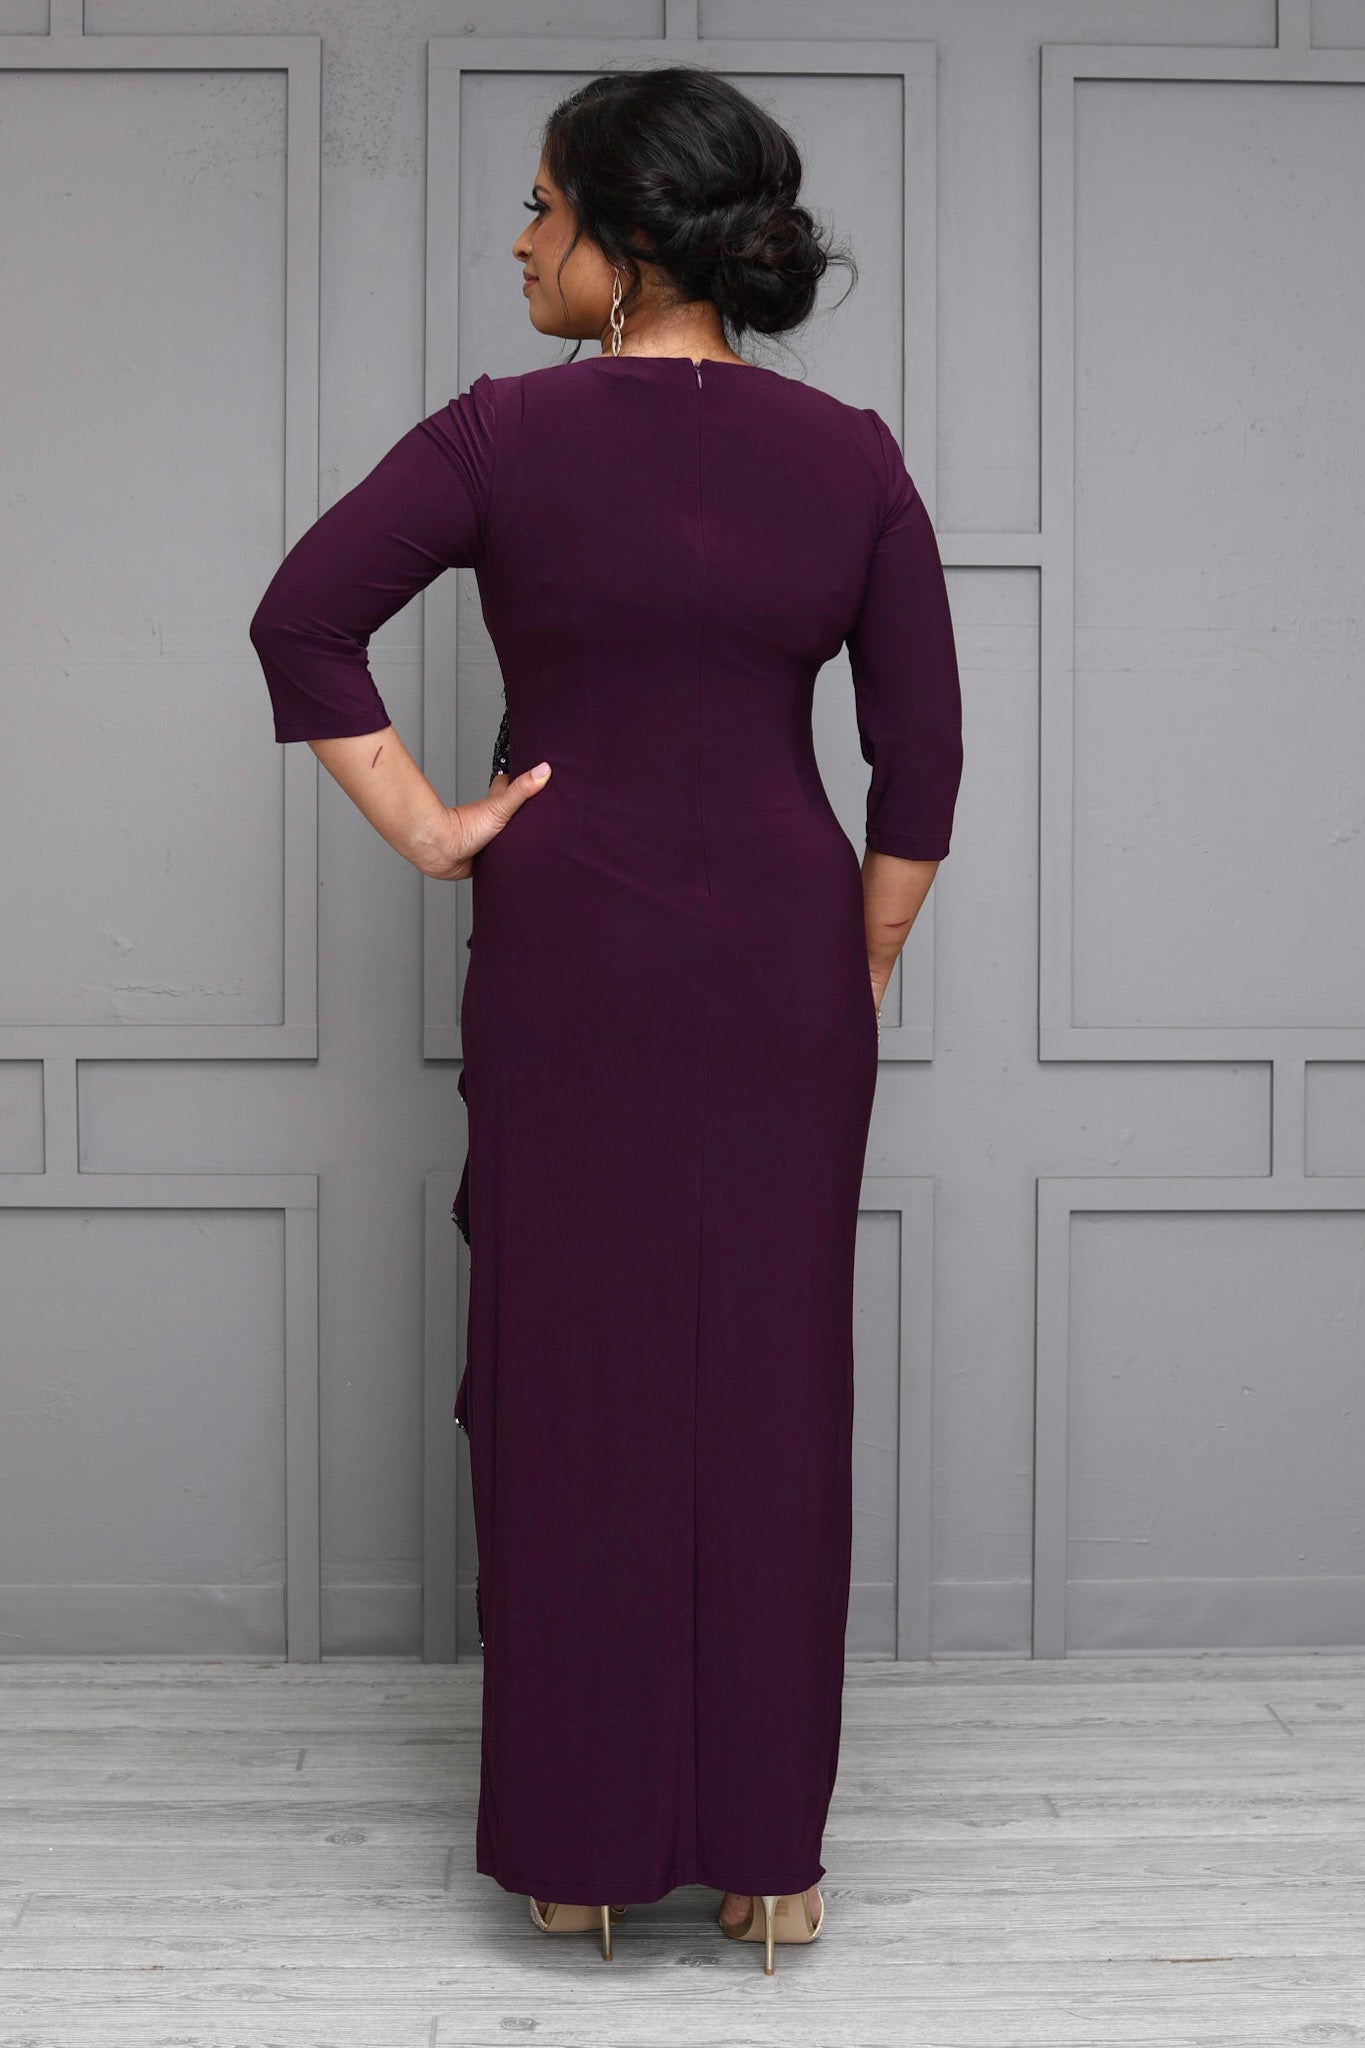 NEW with tags Windsor long dress - Plum Color Beautiful Back Great Fit Size  Sm | eBay